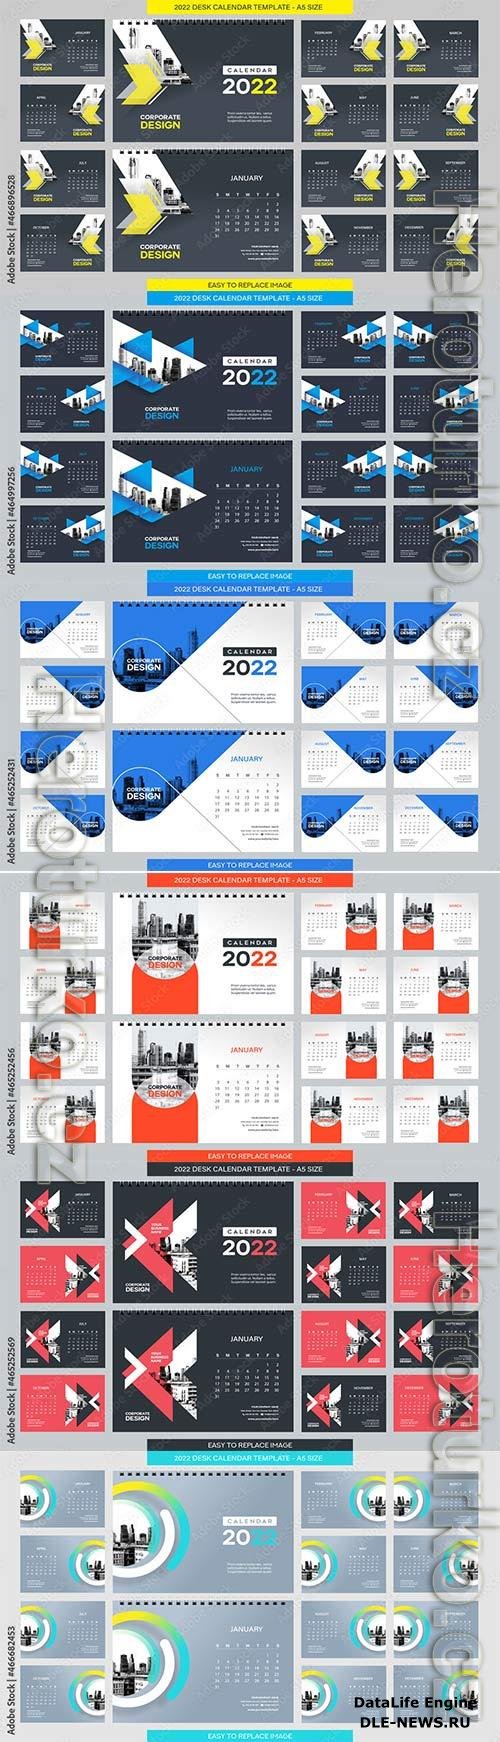 2022 Desk Calendar template - 12 months included - A5 Size